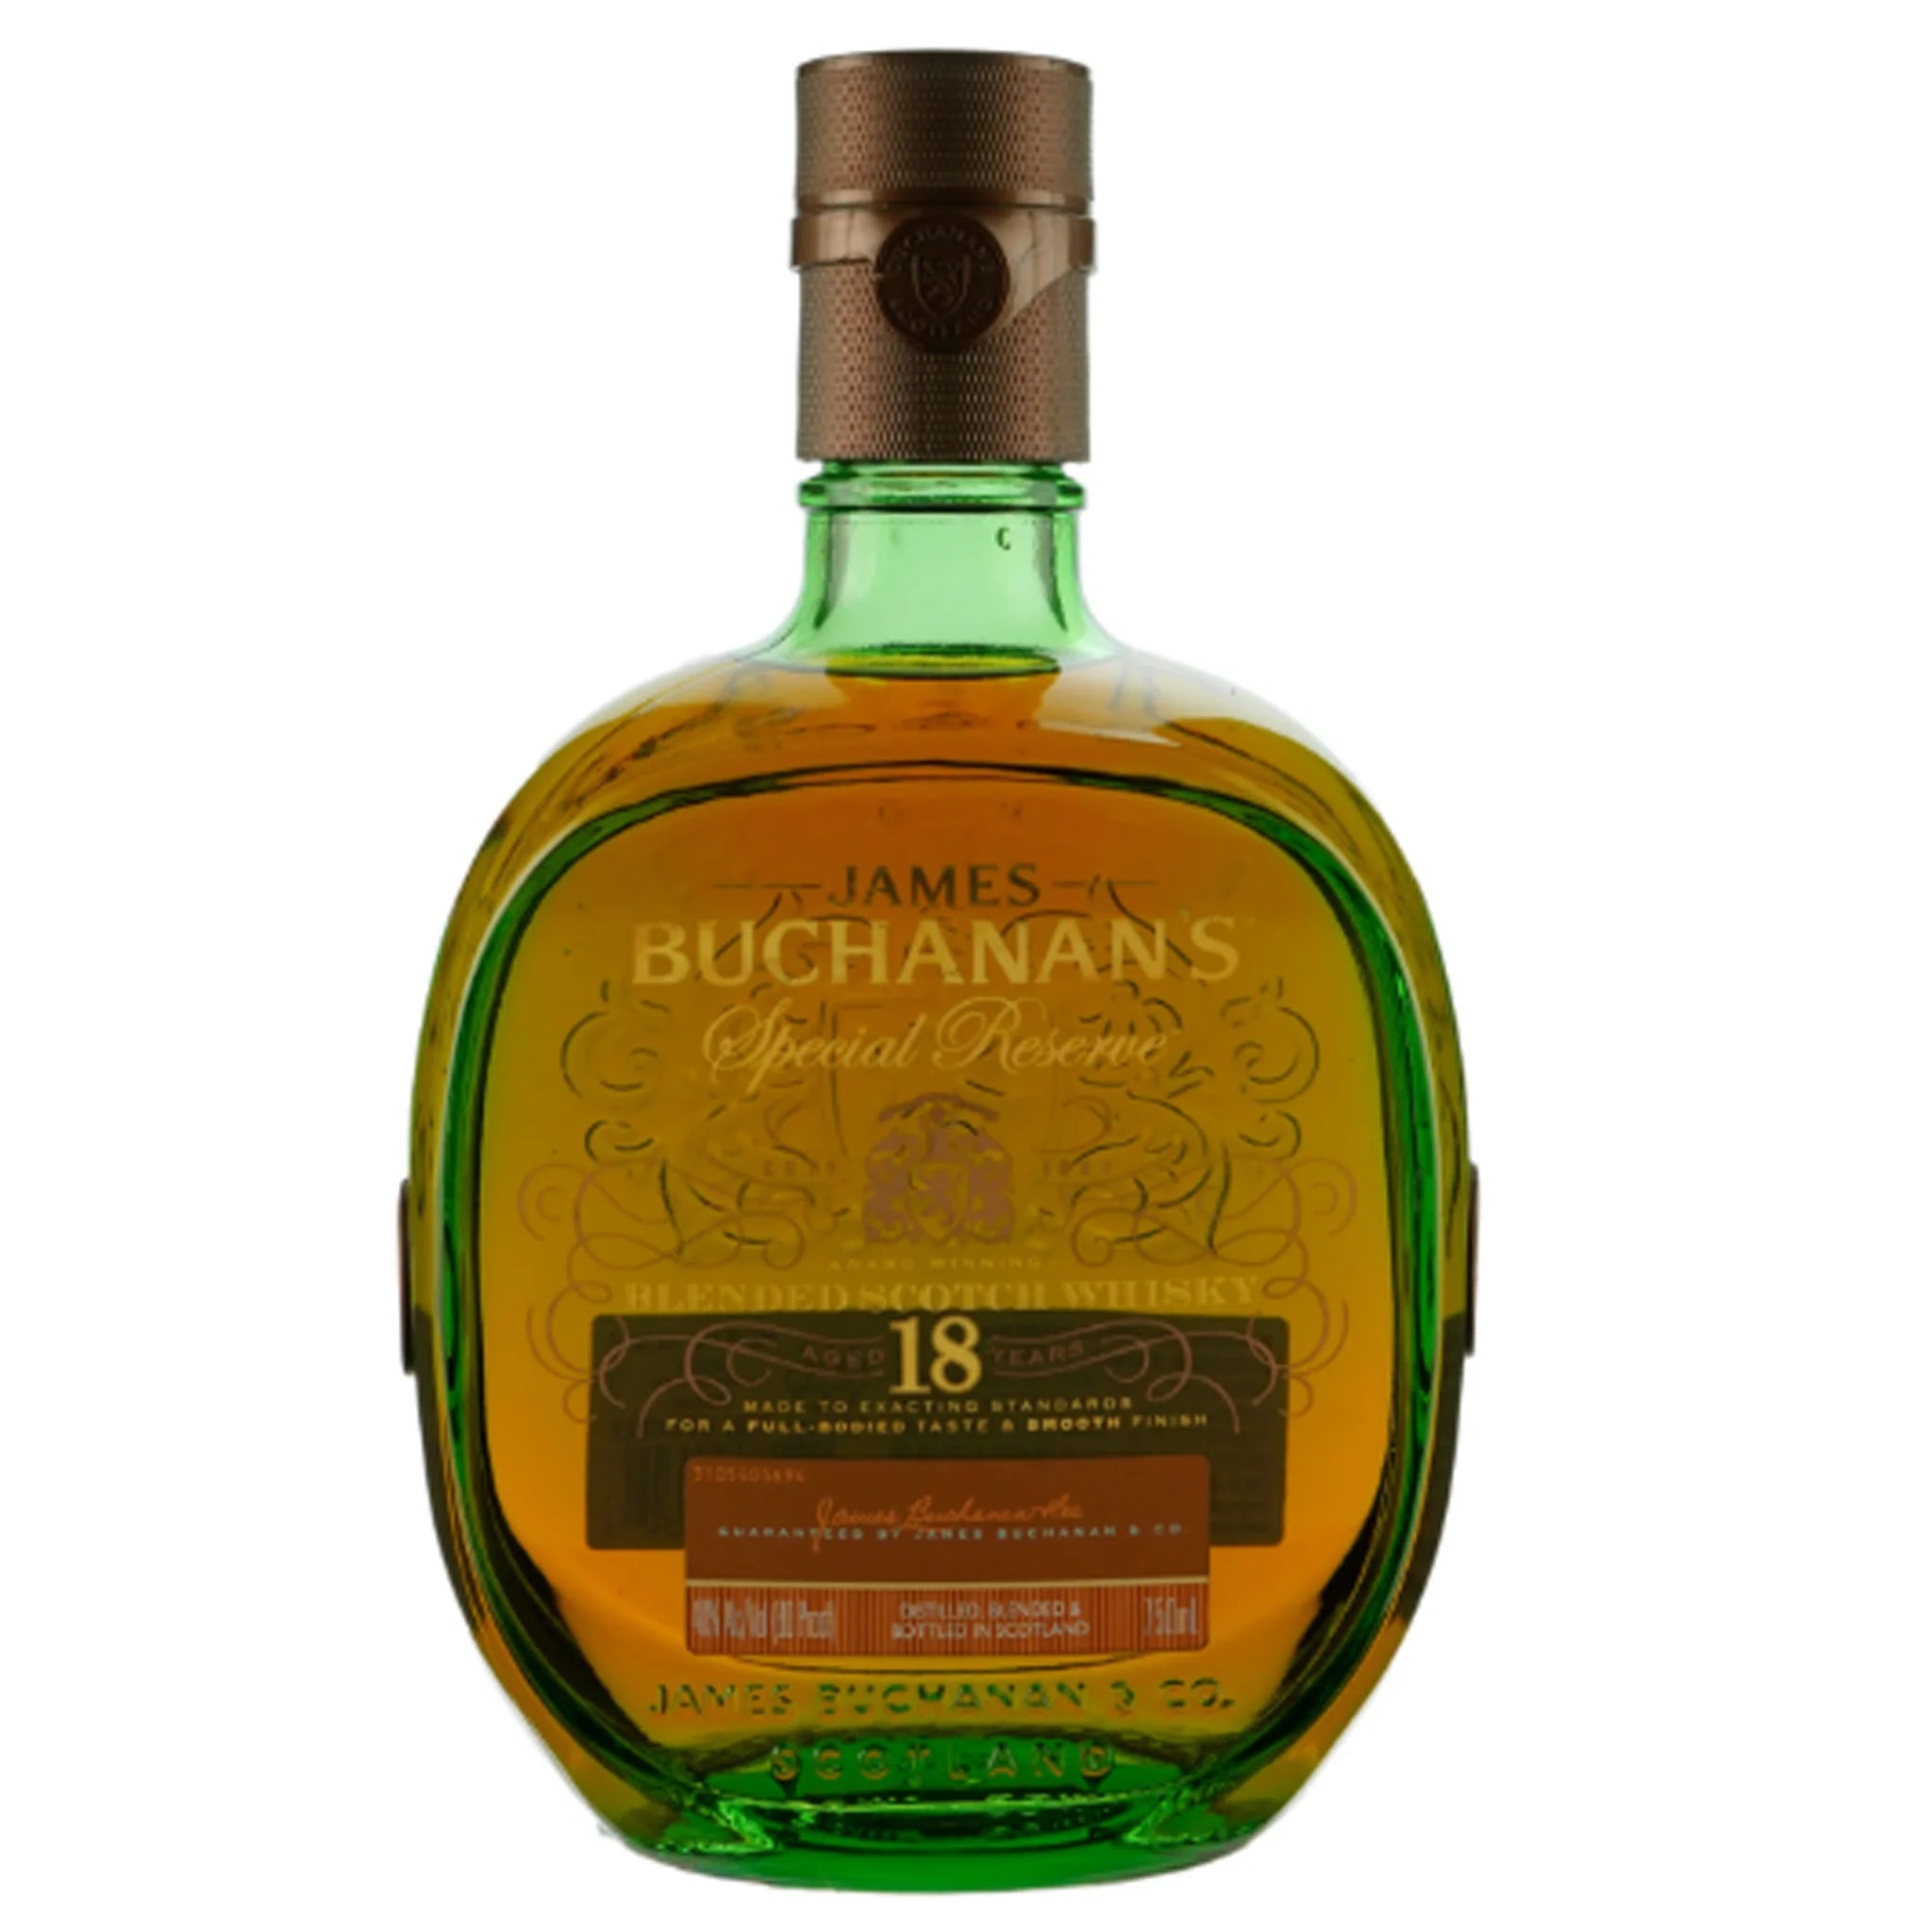 Buchanan's Special Reserve 18 Year Old Blended Scotch Whisky 750ml